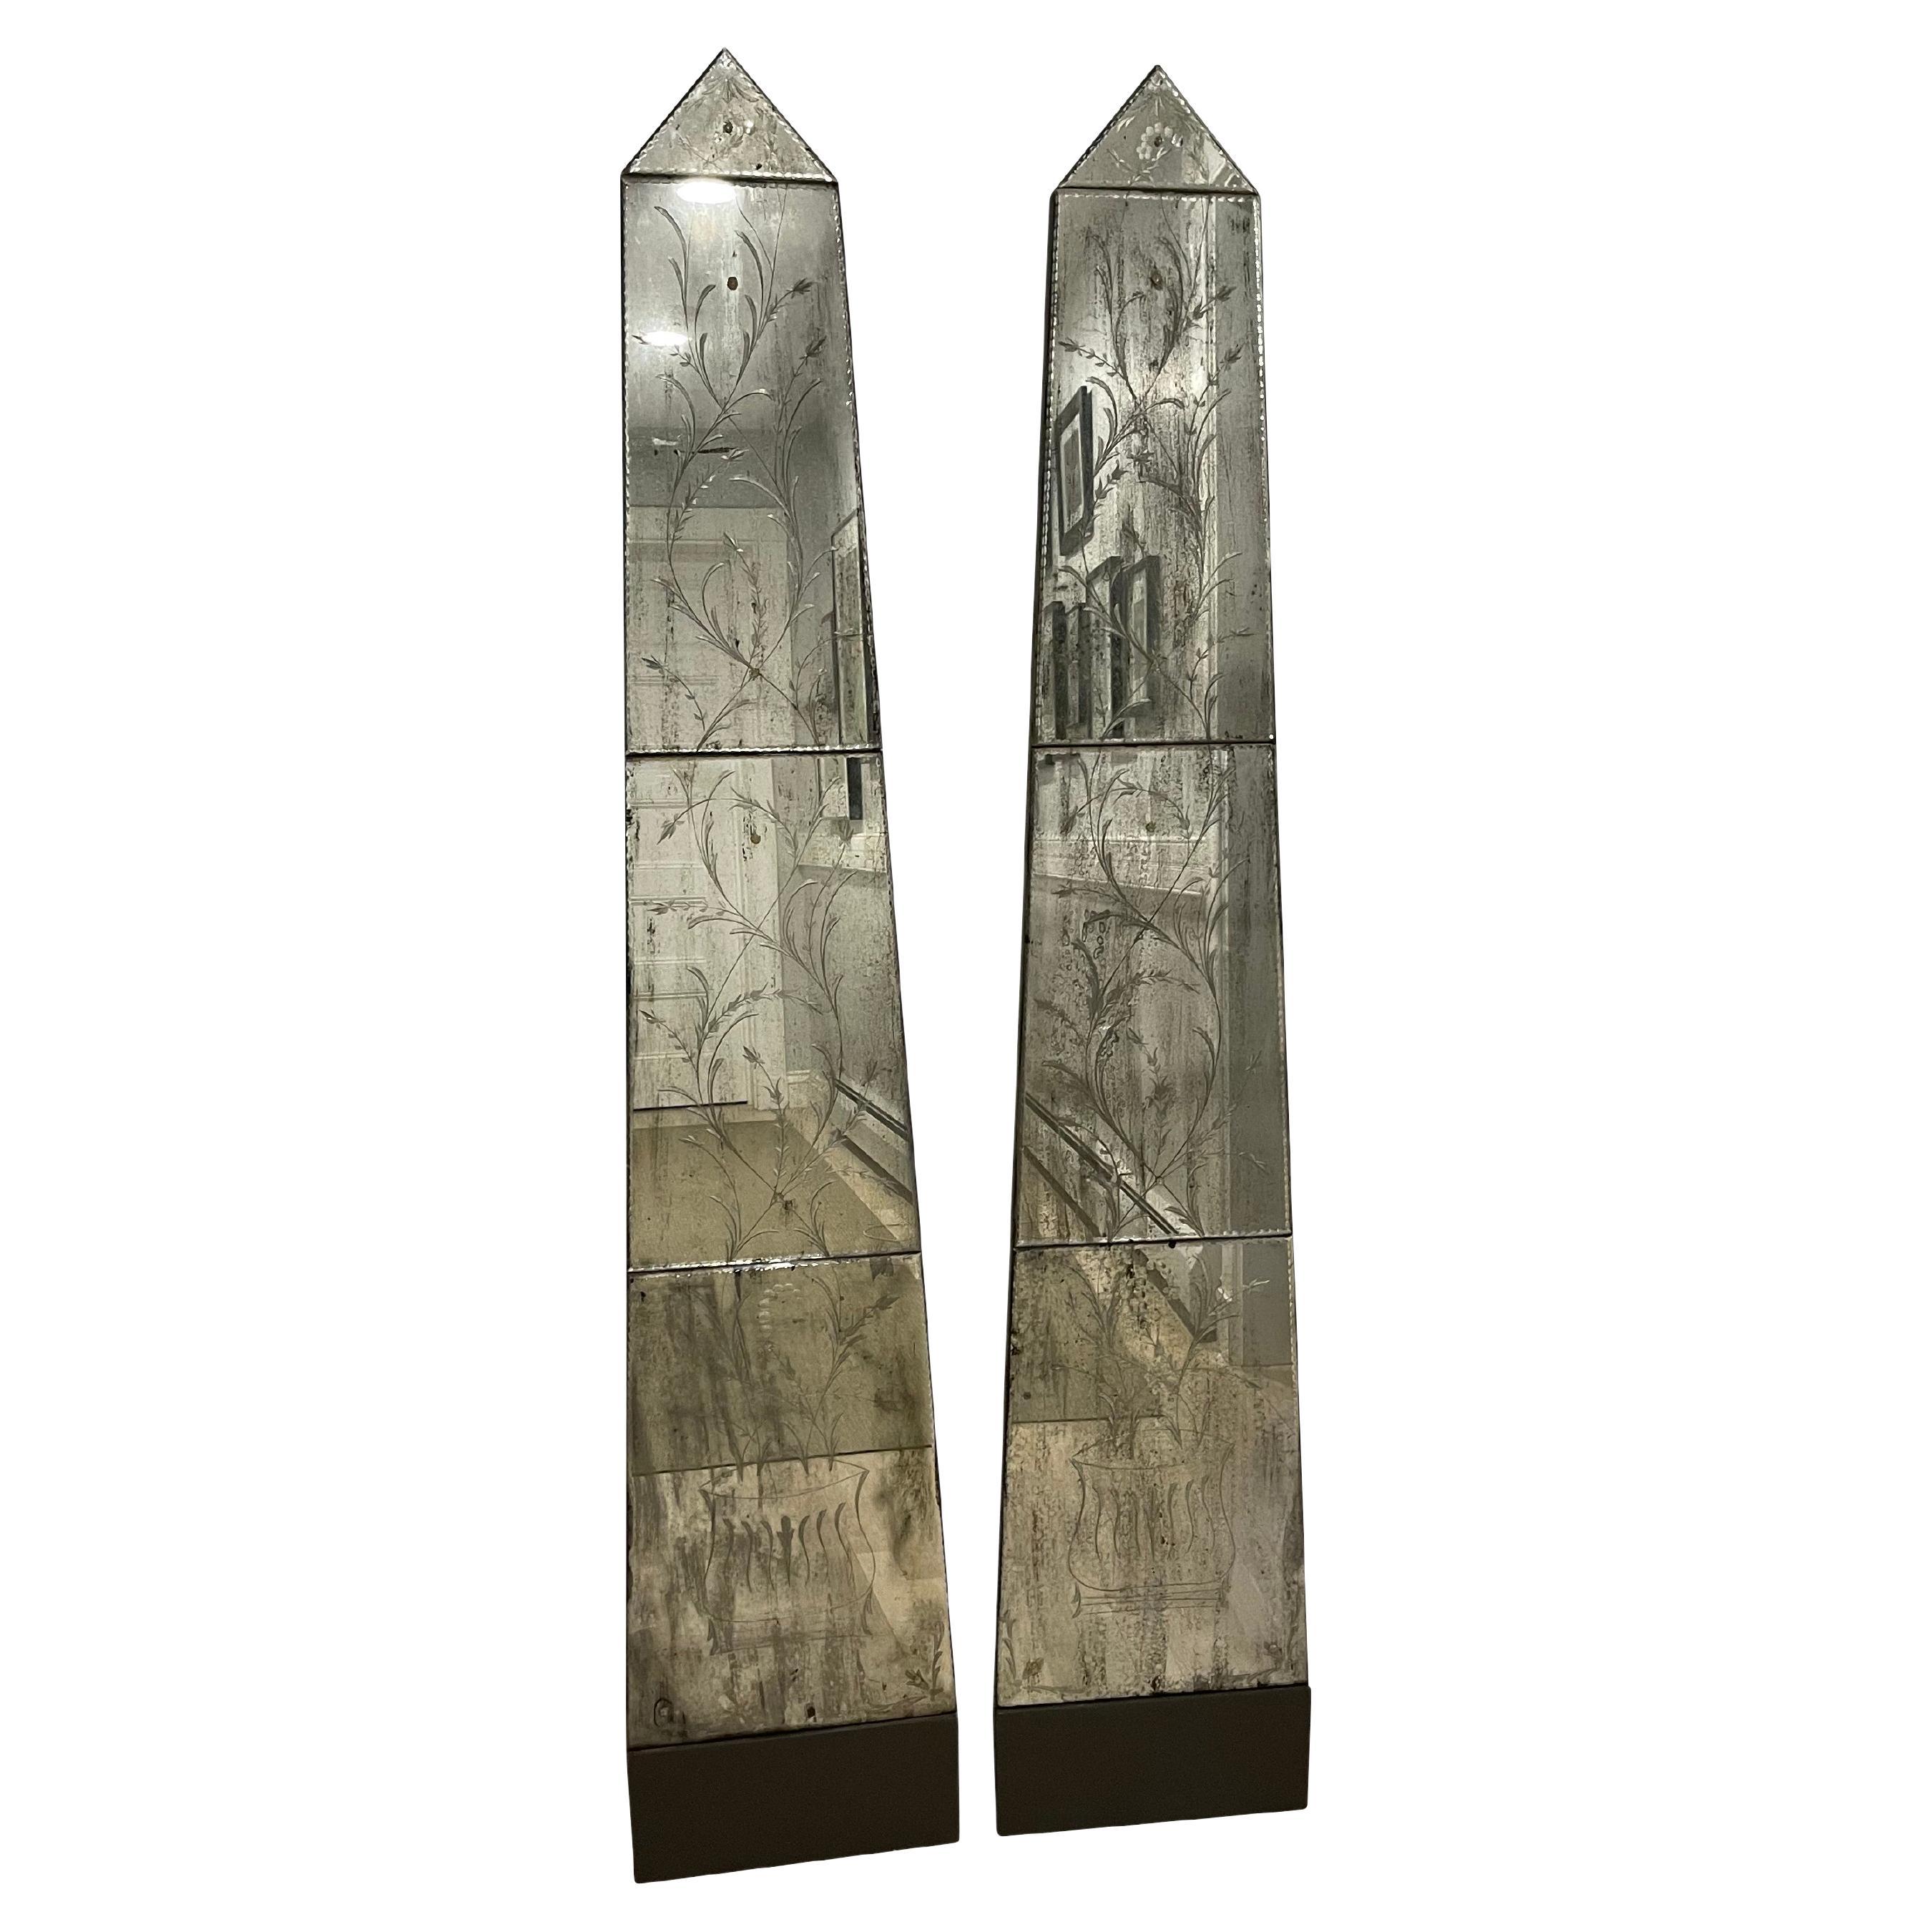 Pair of Obelisk Mirrored Panels with Botanical Etchings